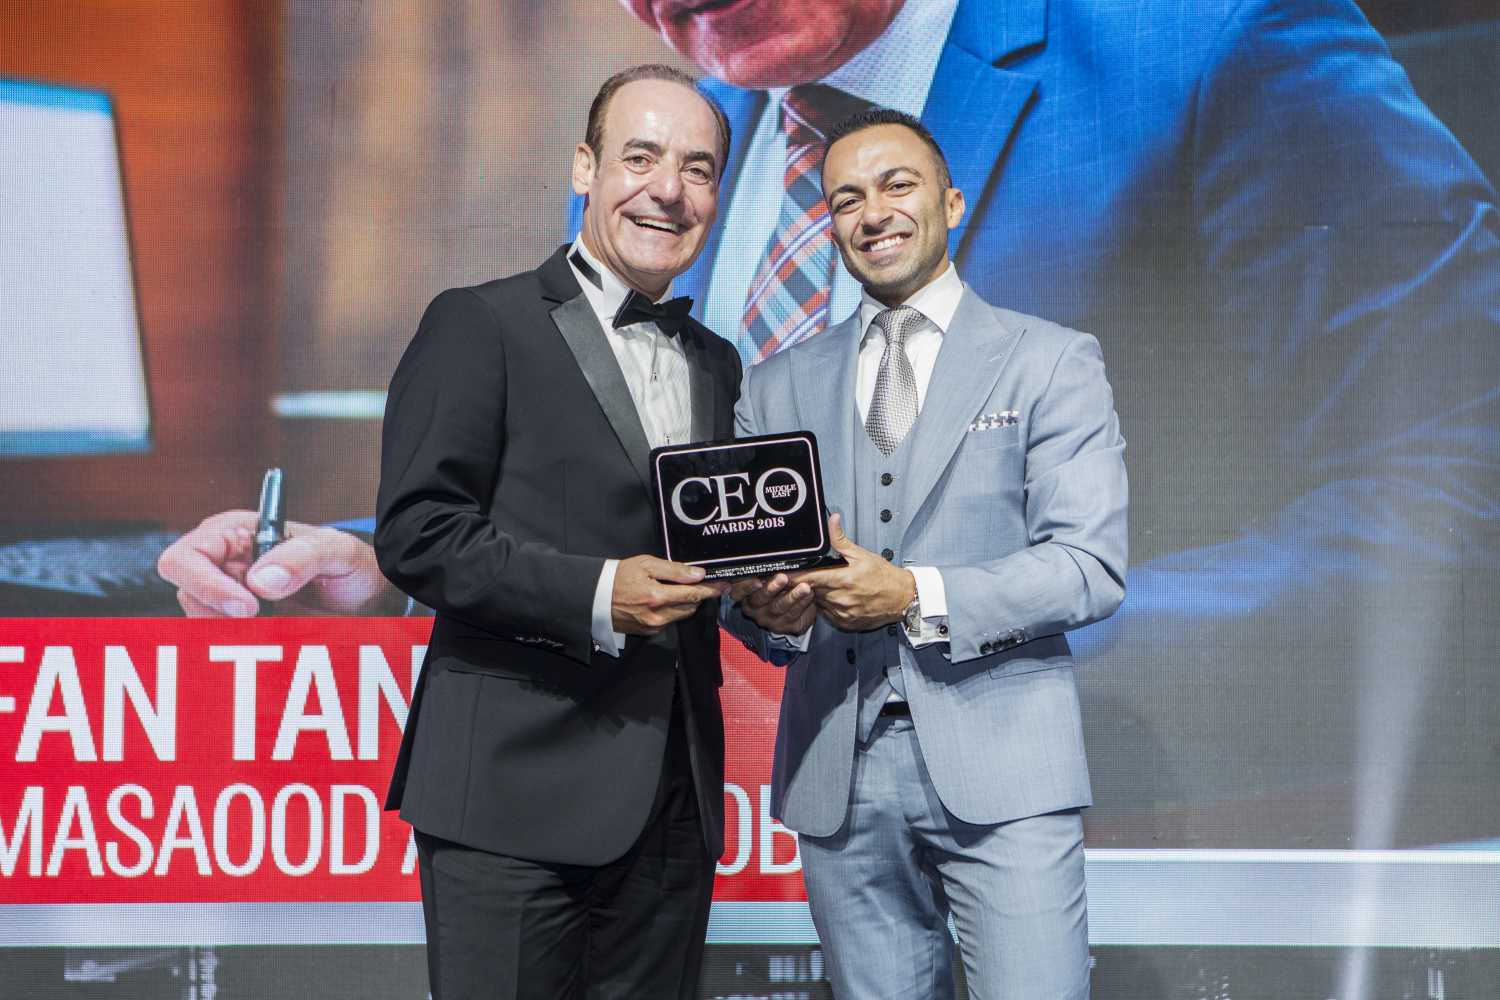 Al Masaood Automobiles’ CEO Irfan Tansel wins ‘CEO of the Year - Automotive Category’ at 2018 CEO Middle East Awards